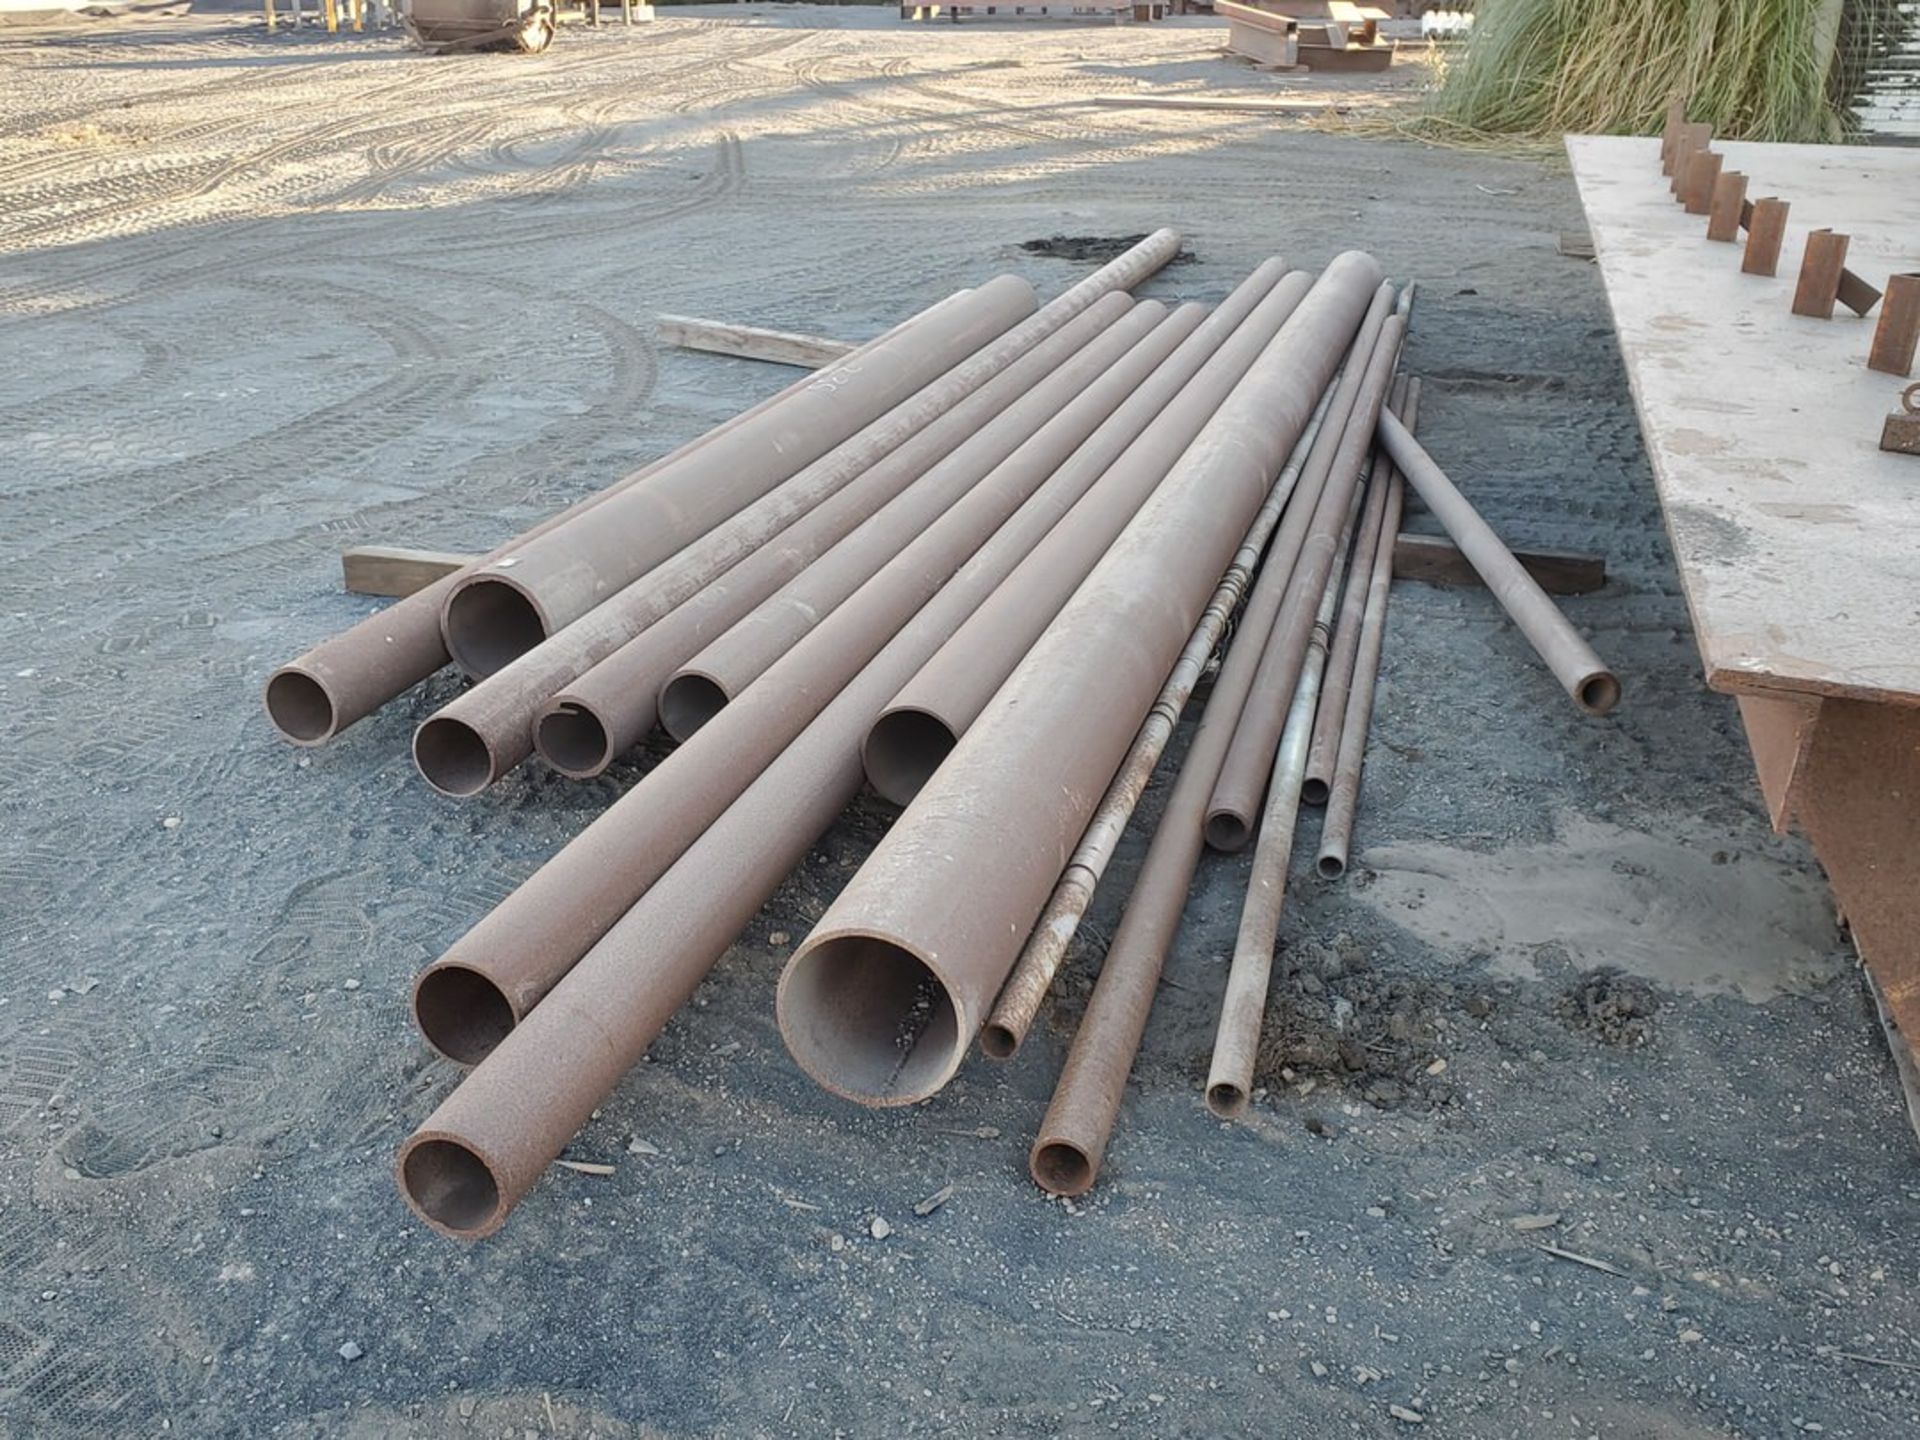 Assorted S/S Raw Matl. To Include But Not Limited To: Rebar, Pipe, Flat Bar, Angle, Sq. Tubing, Up - Image 5 of 14